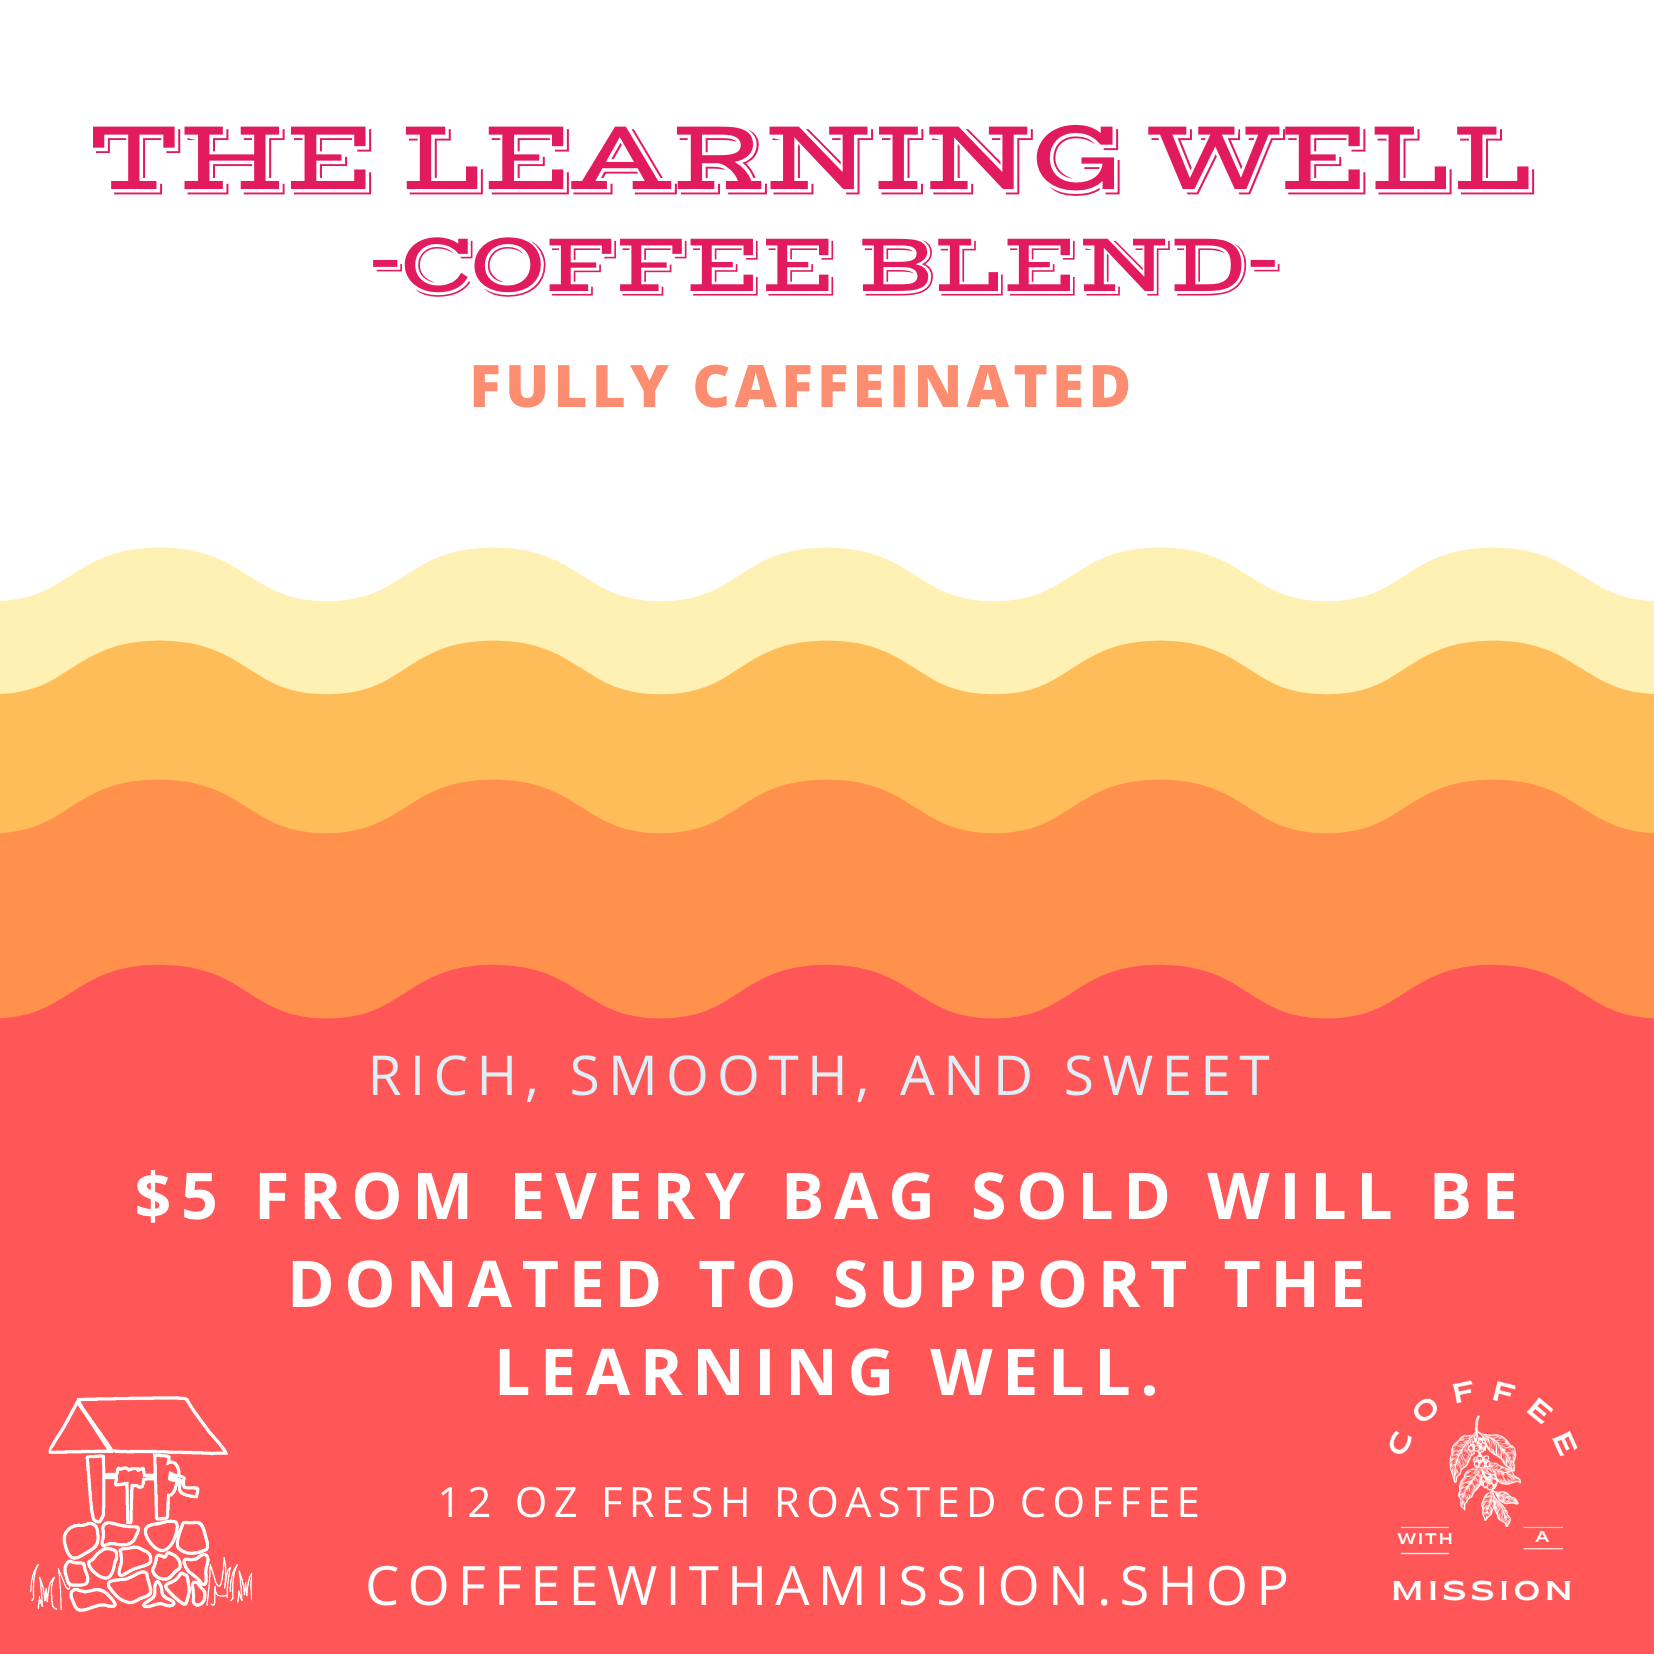 The Learning Well Coffee Blend